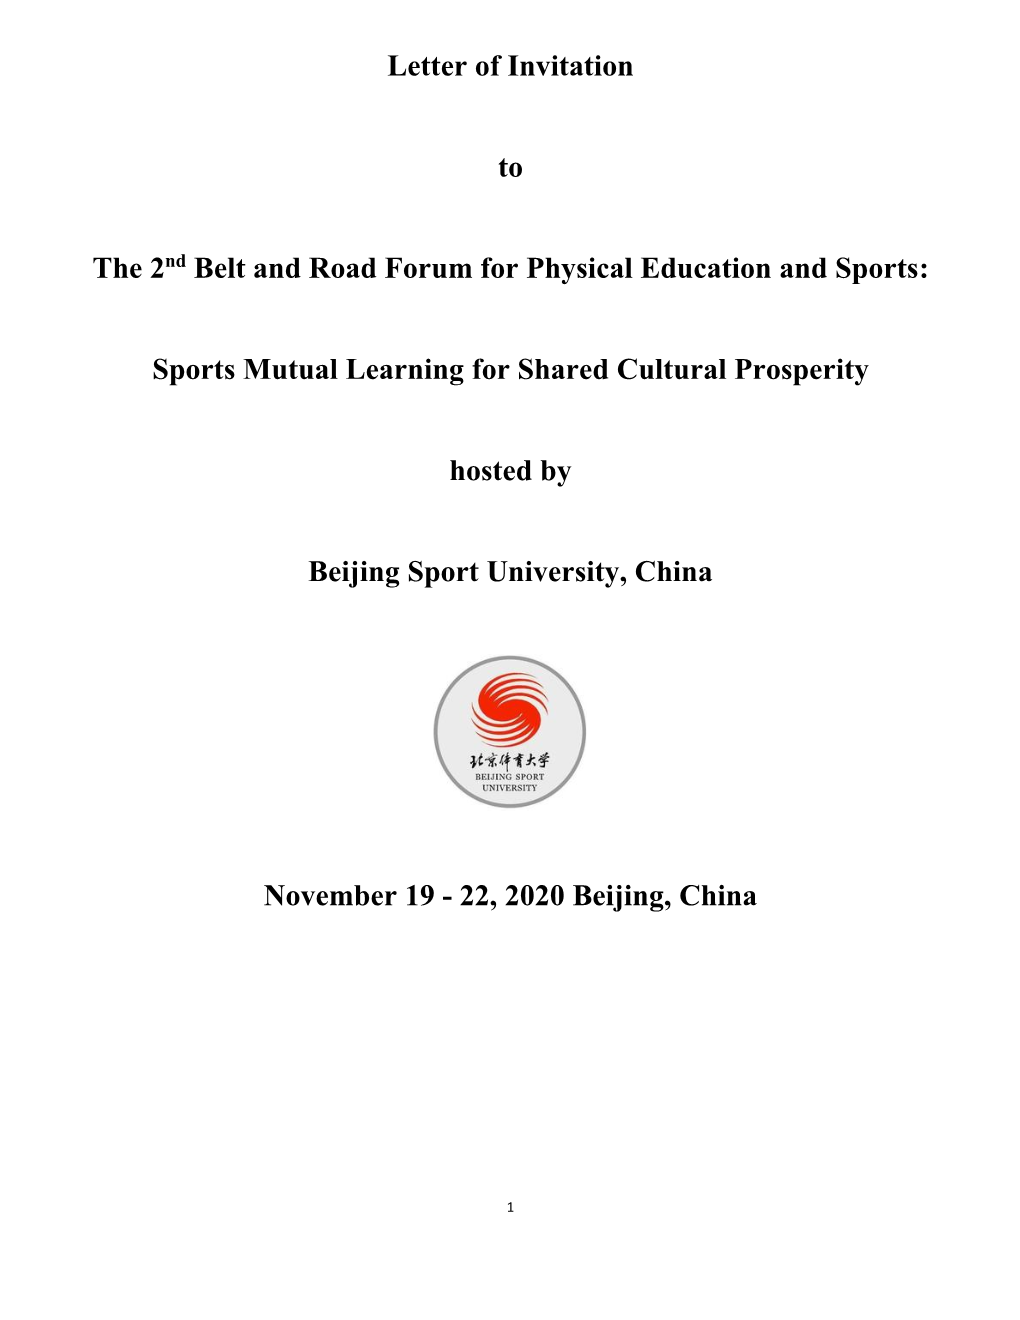 Letter of Invitation to the 2Nd Belt and Road Forum for Physical Education